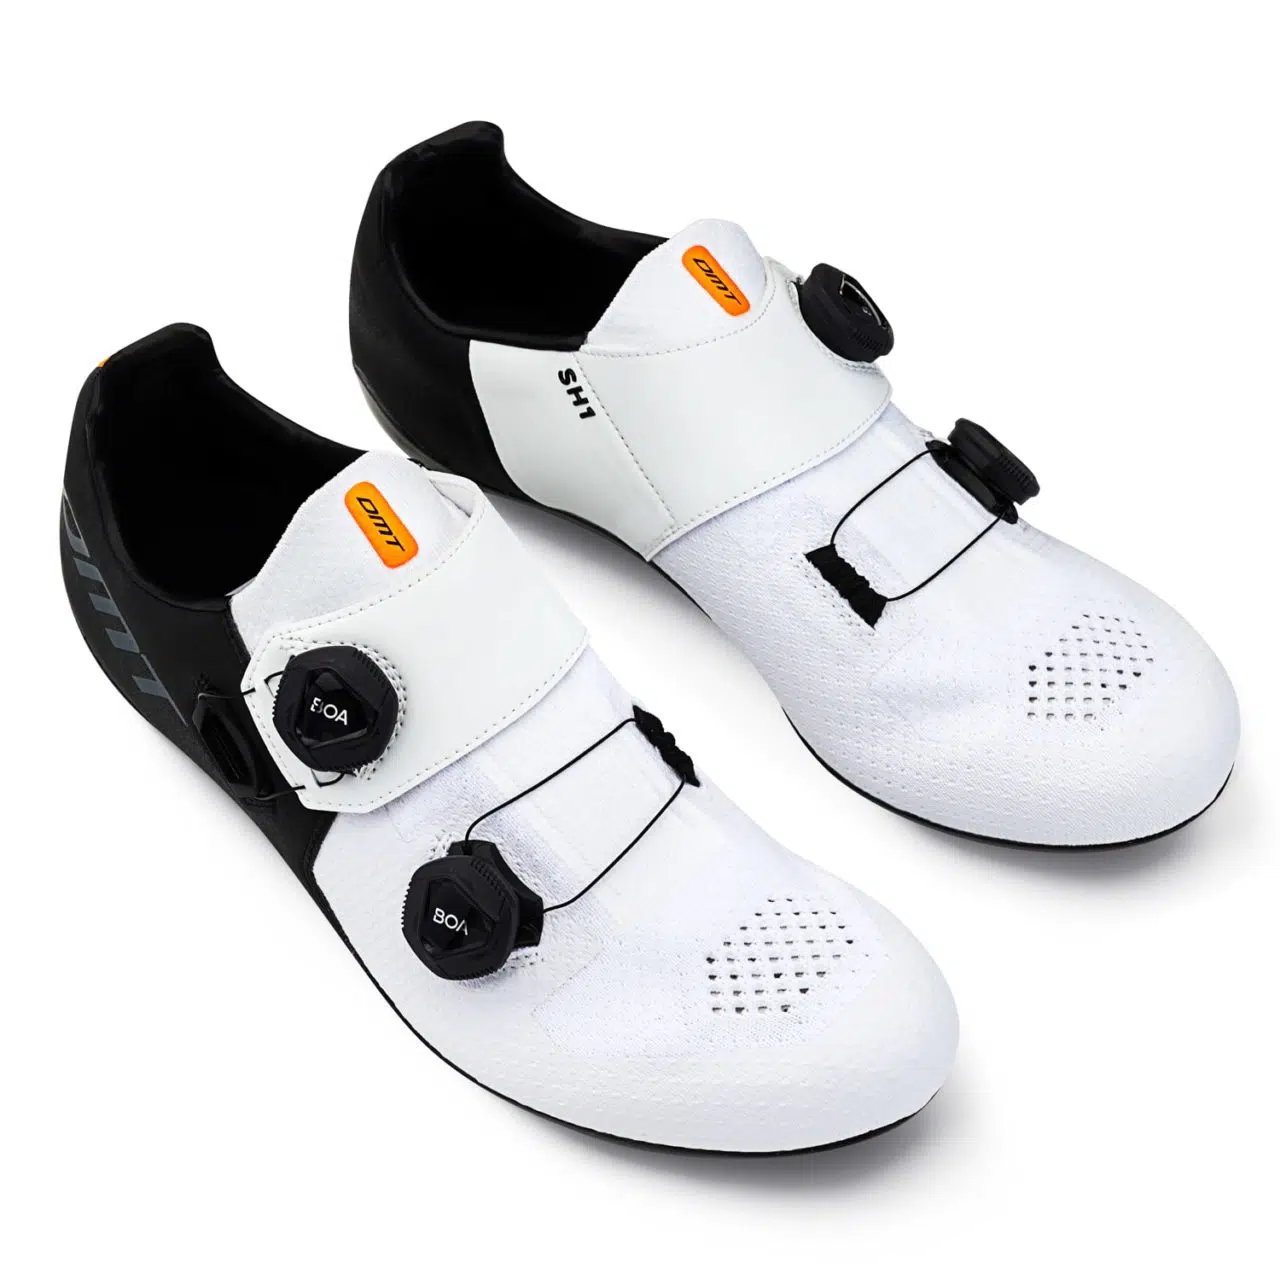 DMT SH1 Road Shoes Black/White side by side